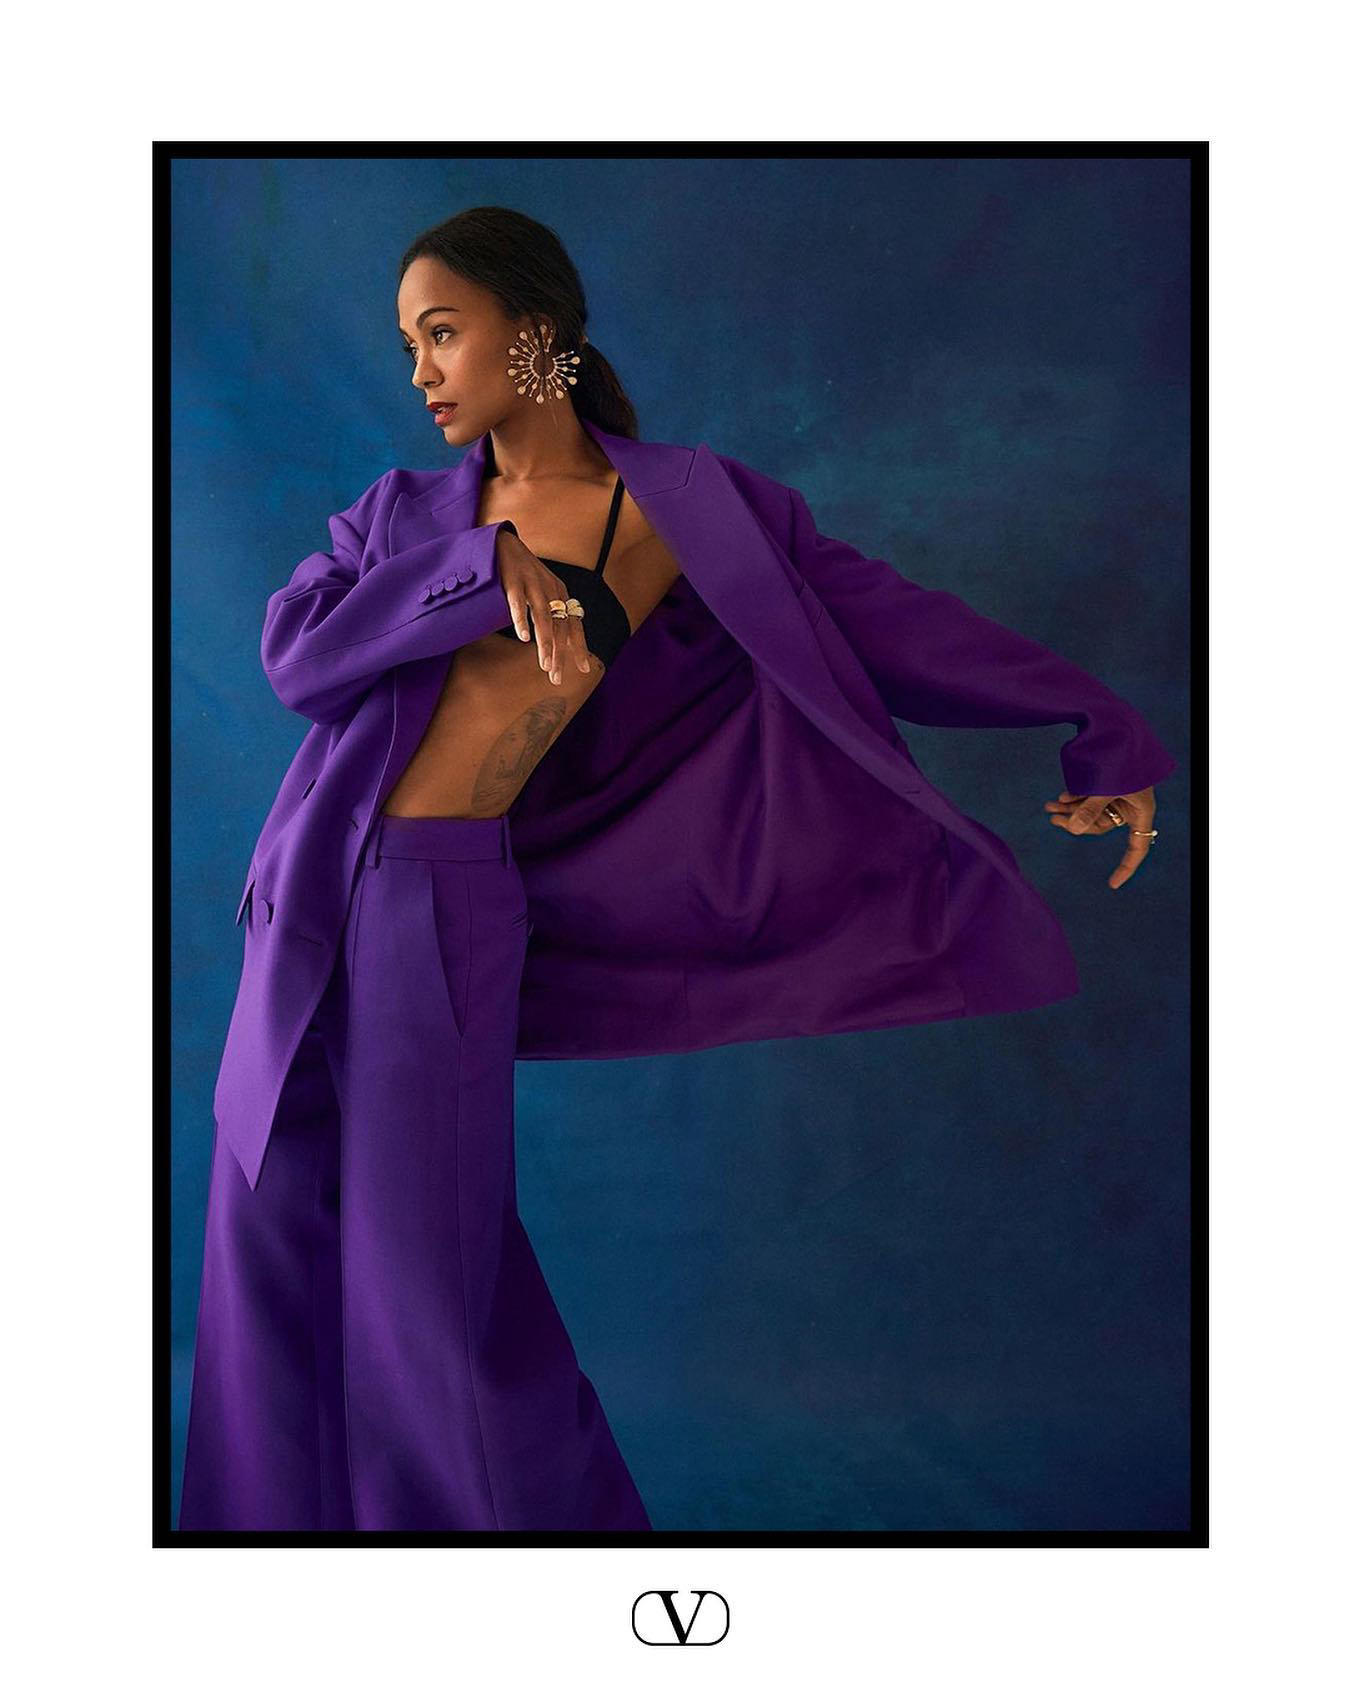 Valentino - #zoesaldana stars in #WWD wearing #ValentinoSurfaces For the magazine’s latest issue, th